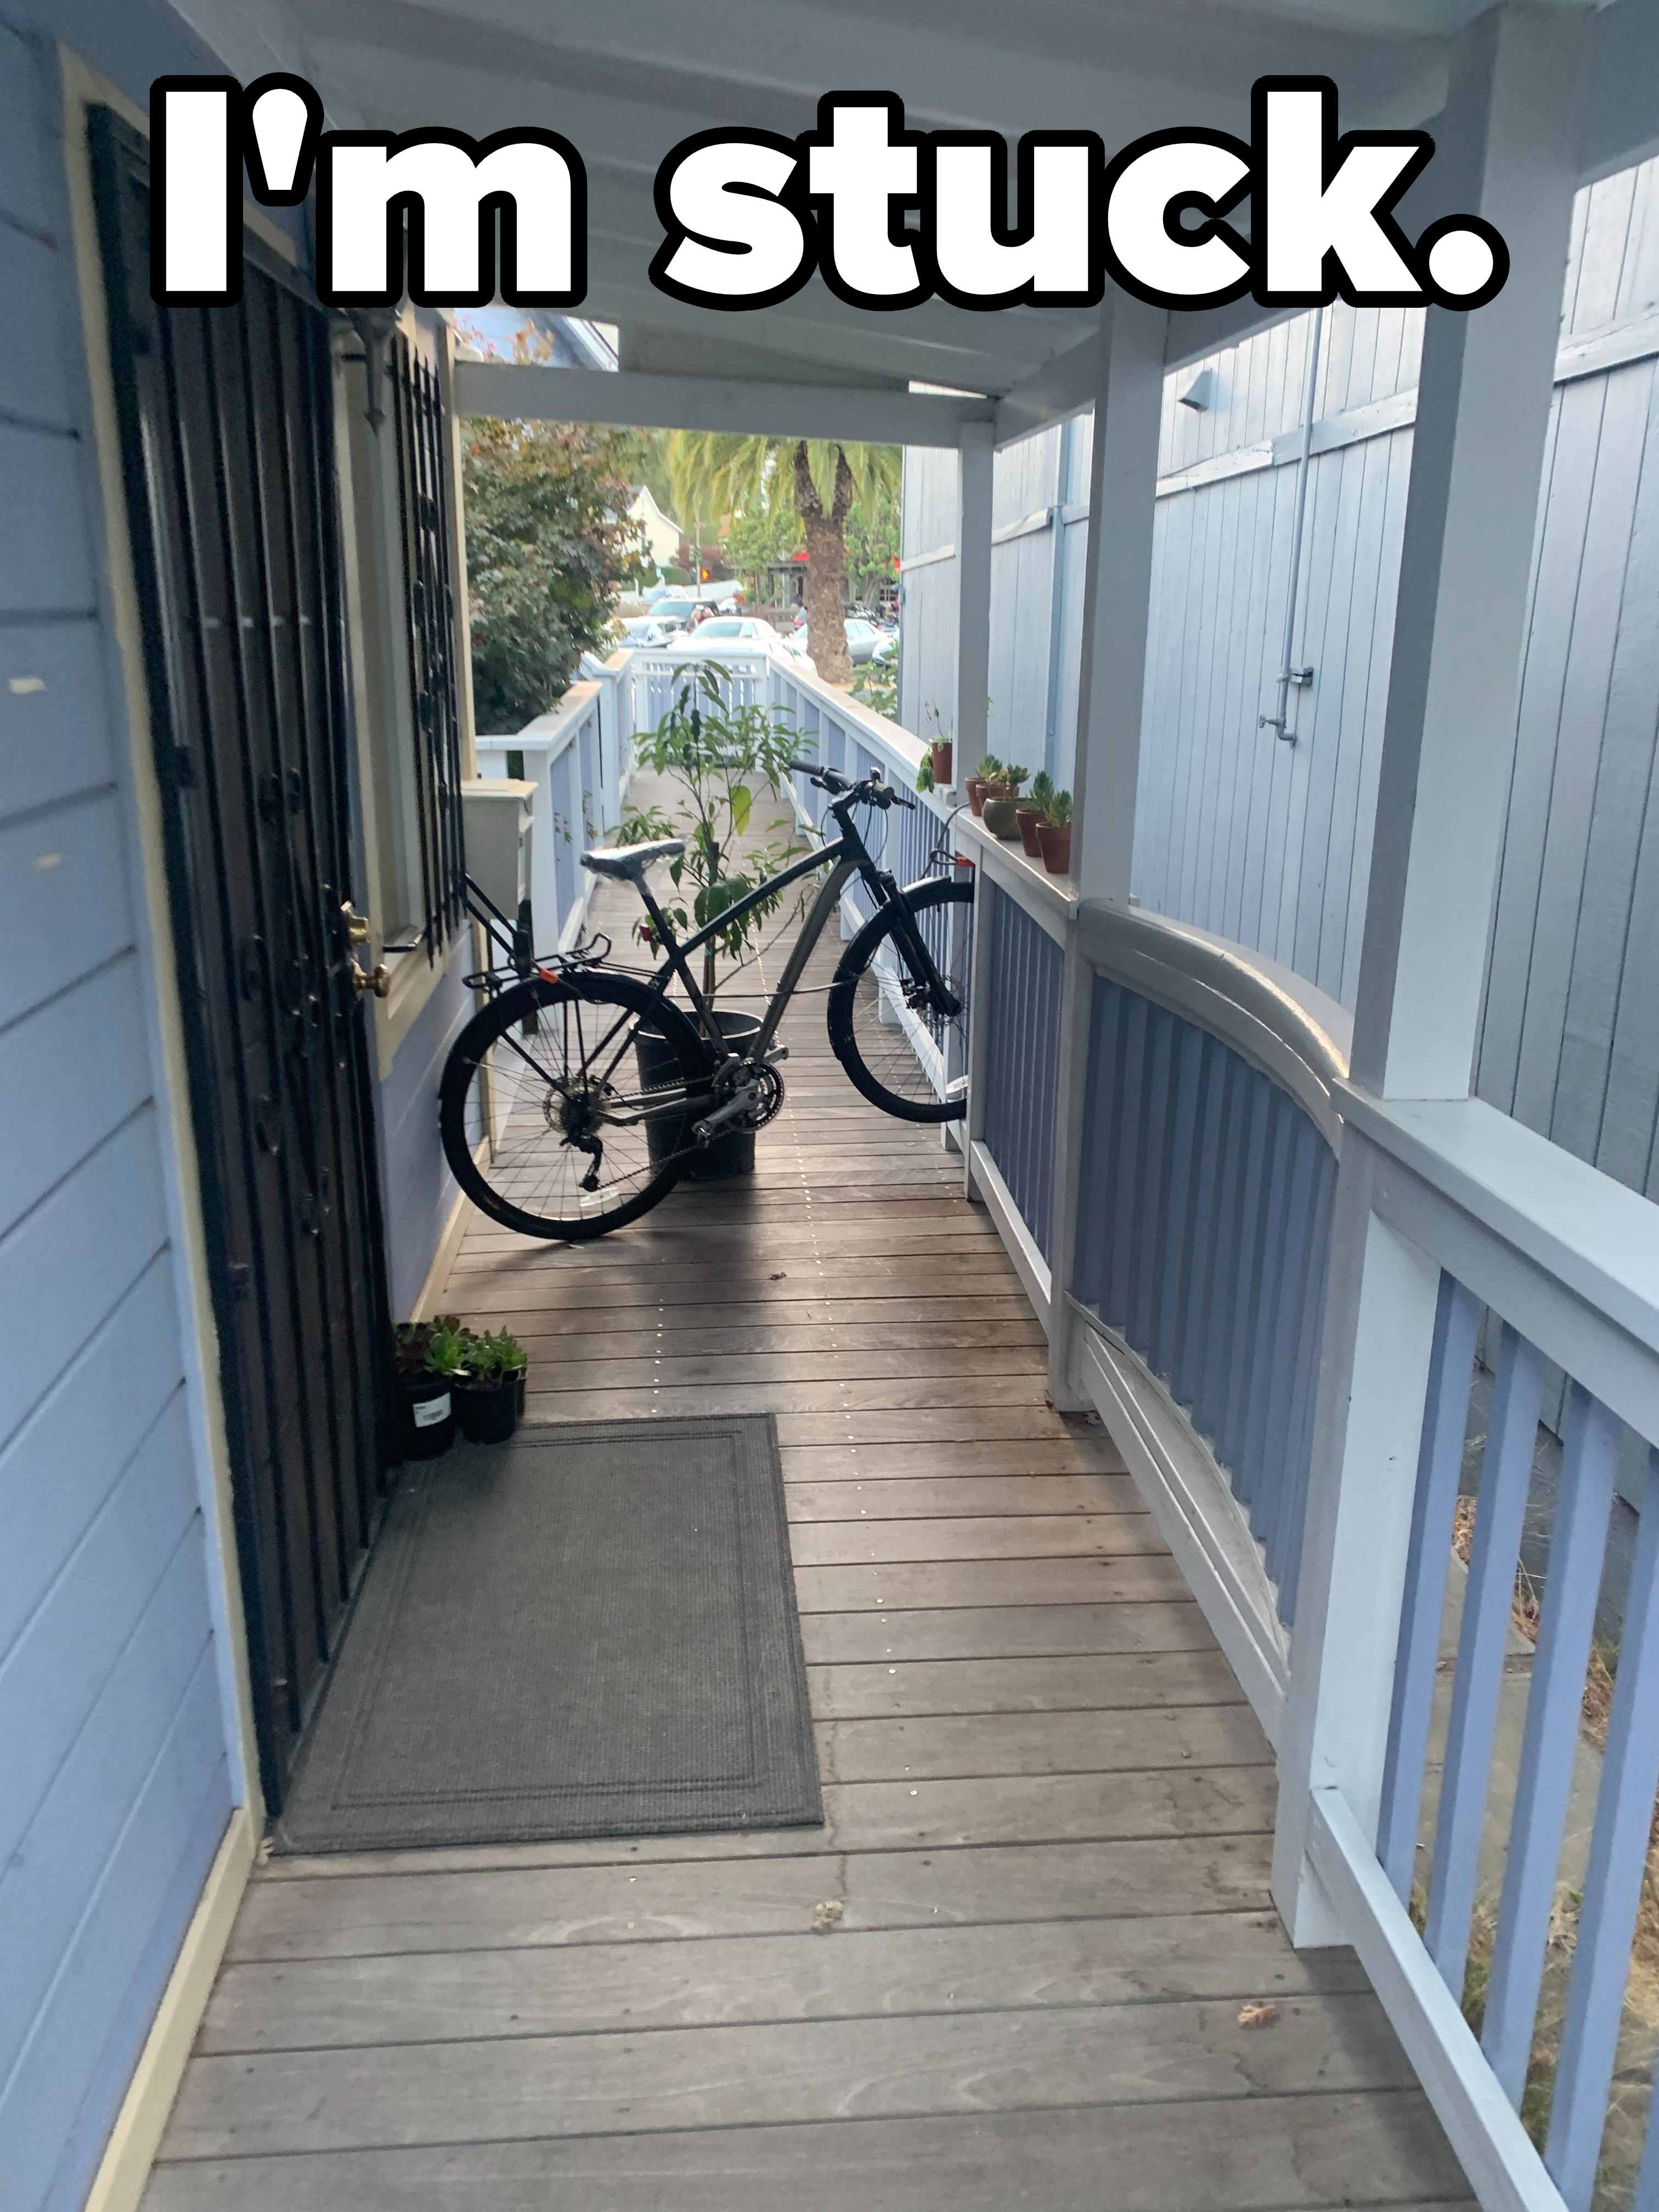 A bicycle is stuck sideways between a fence and a wooden railing on a long, narrow porch